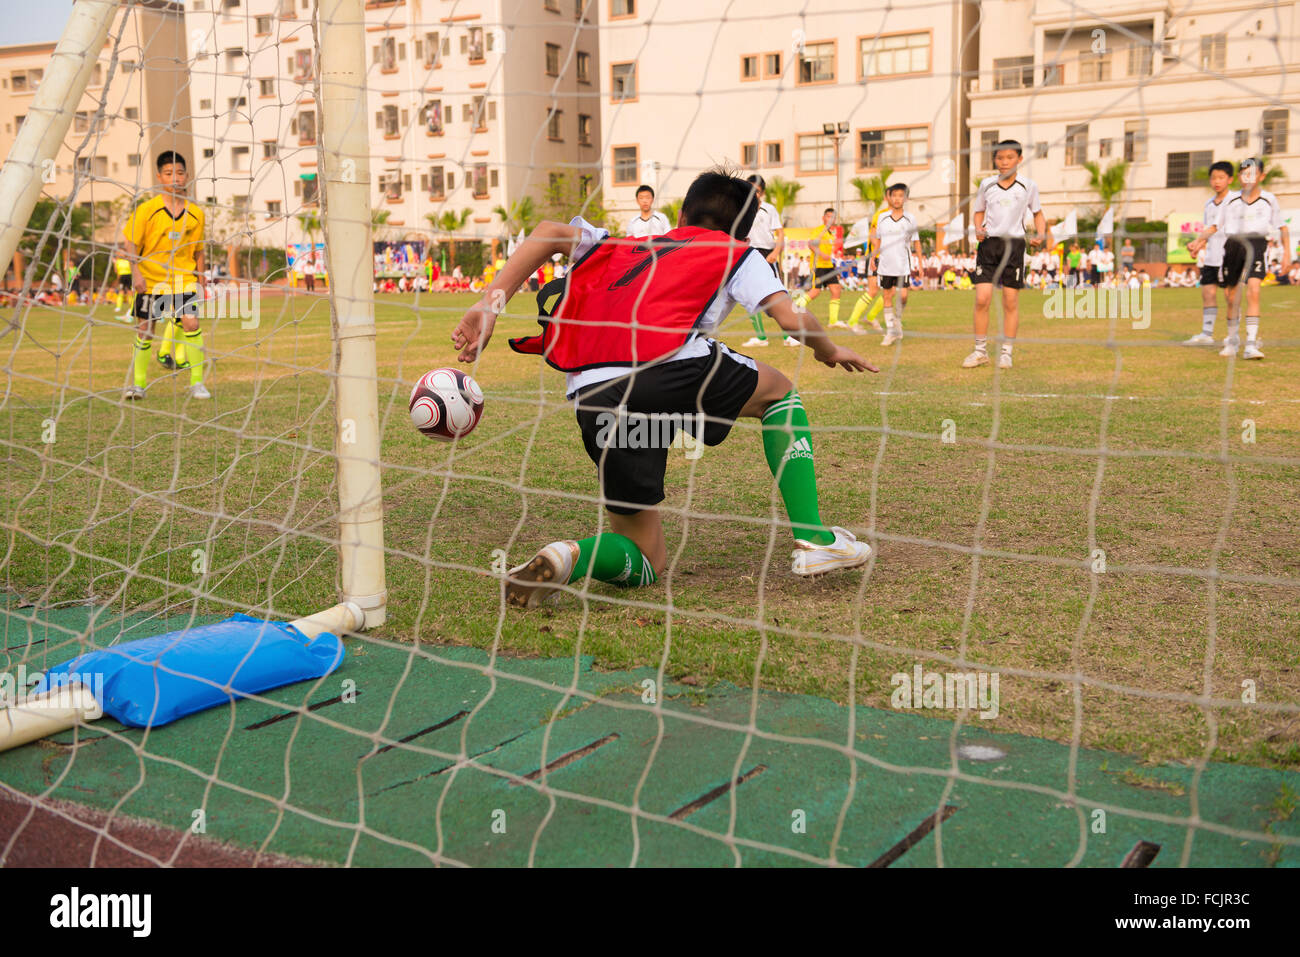 ZHONGSHAN, CHINA - MARCH 19 kids playing at a friendly soccer game on March 19, 2015 in Zhongshan, China. Stock Photo